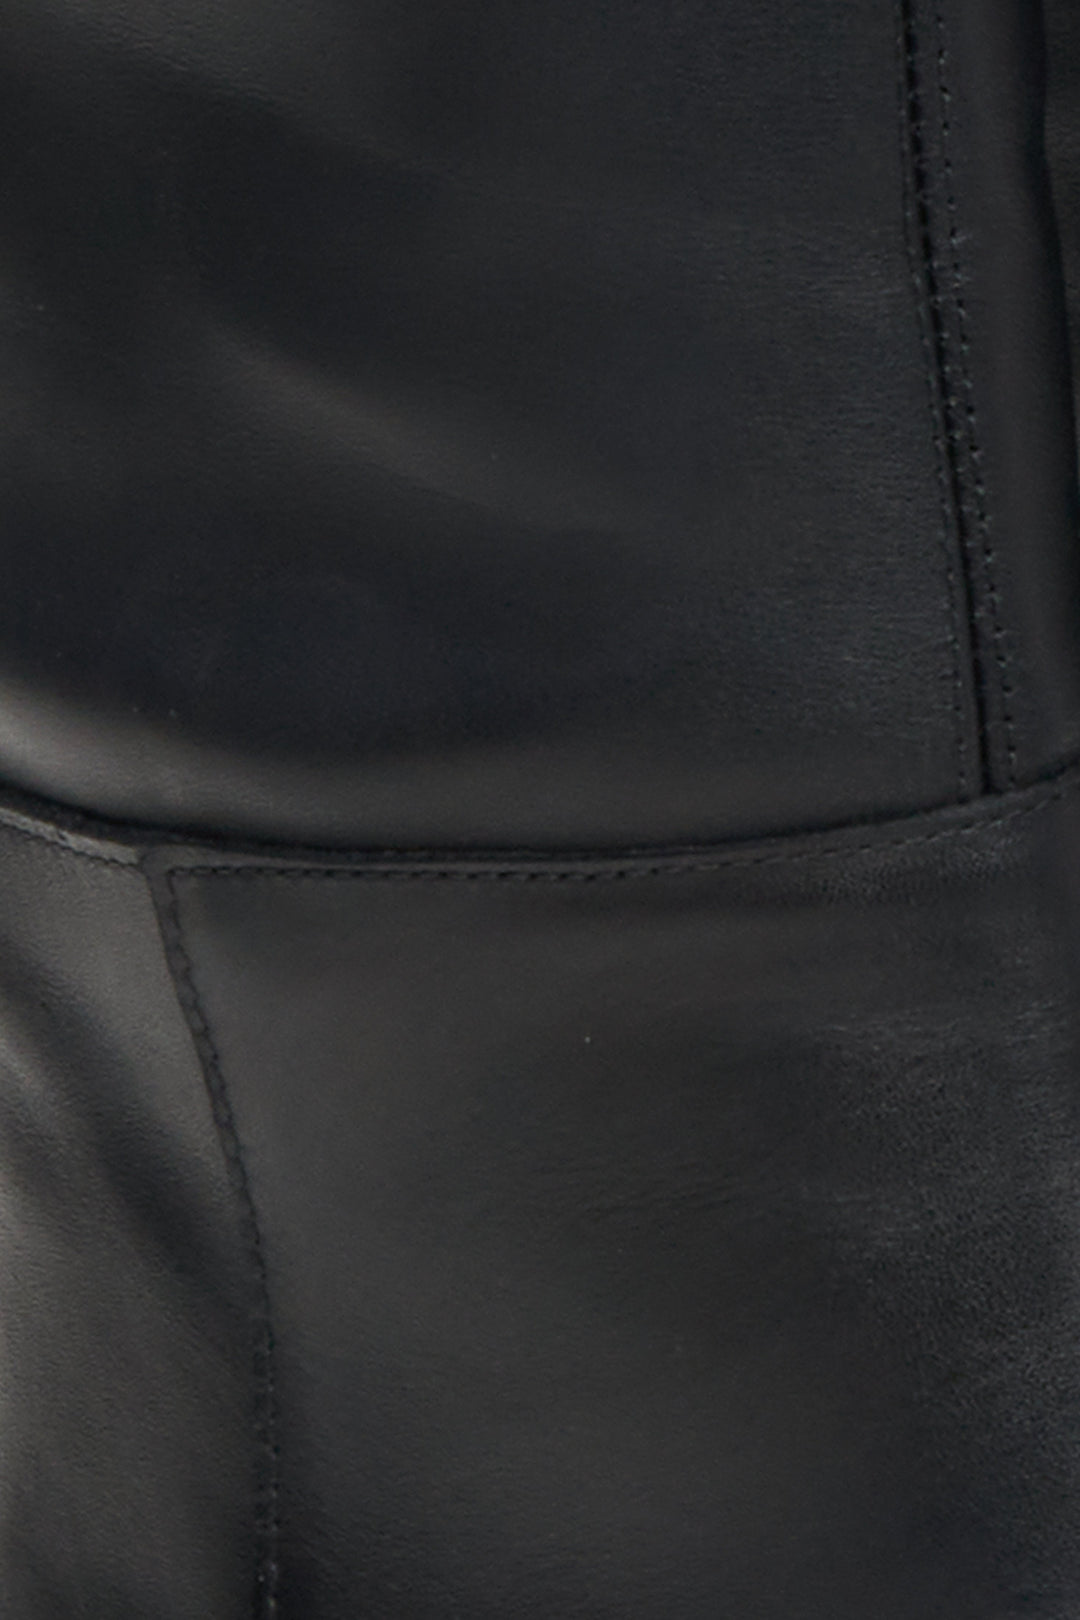 Wide-calf black leather boots Estro - a close-up on details.